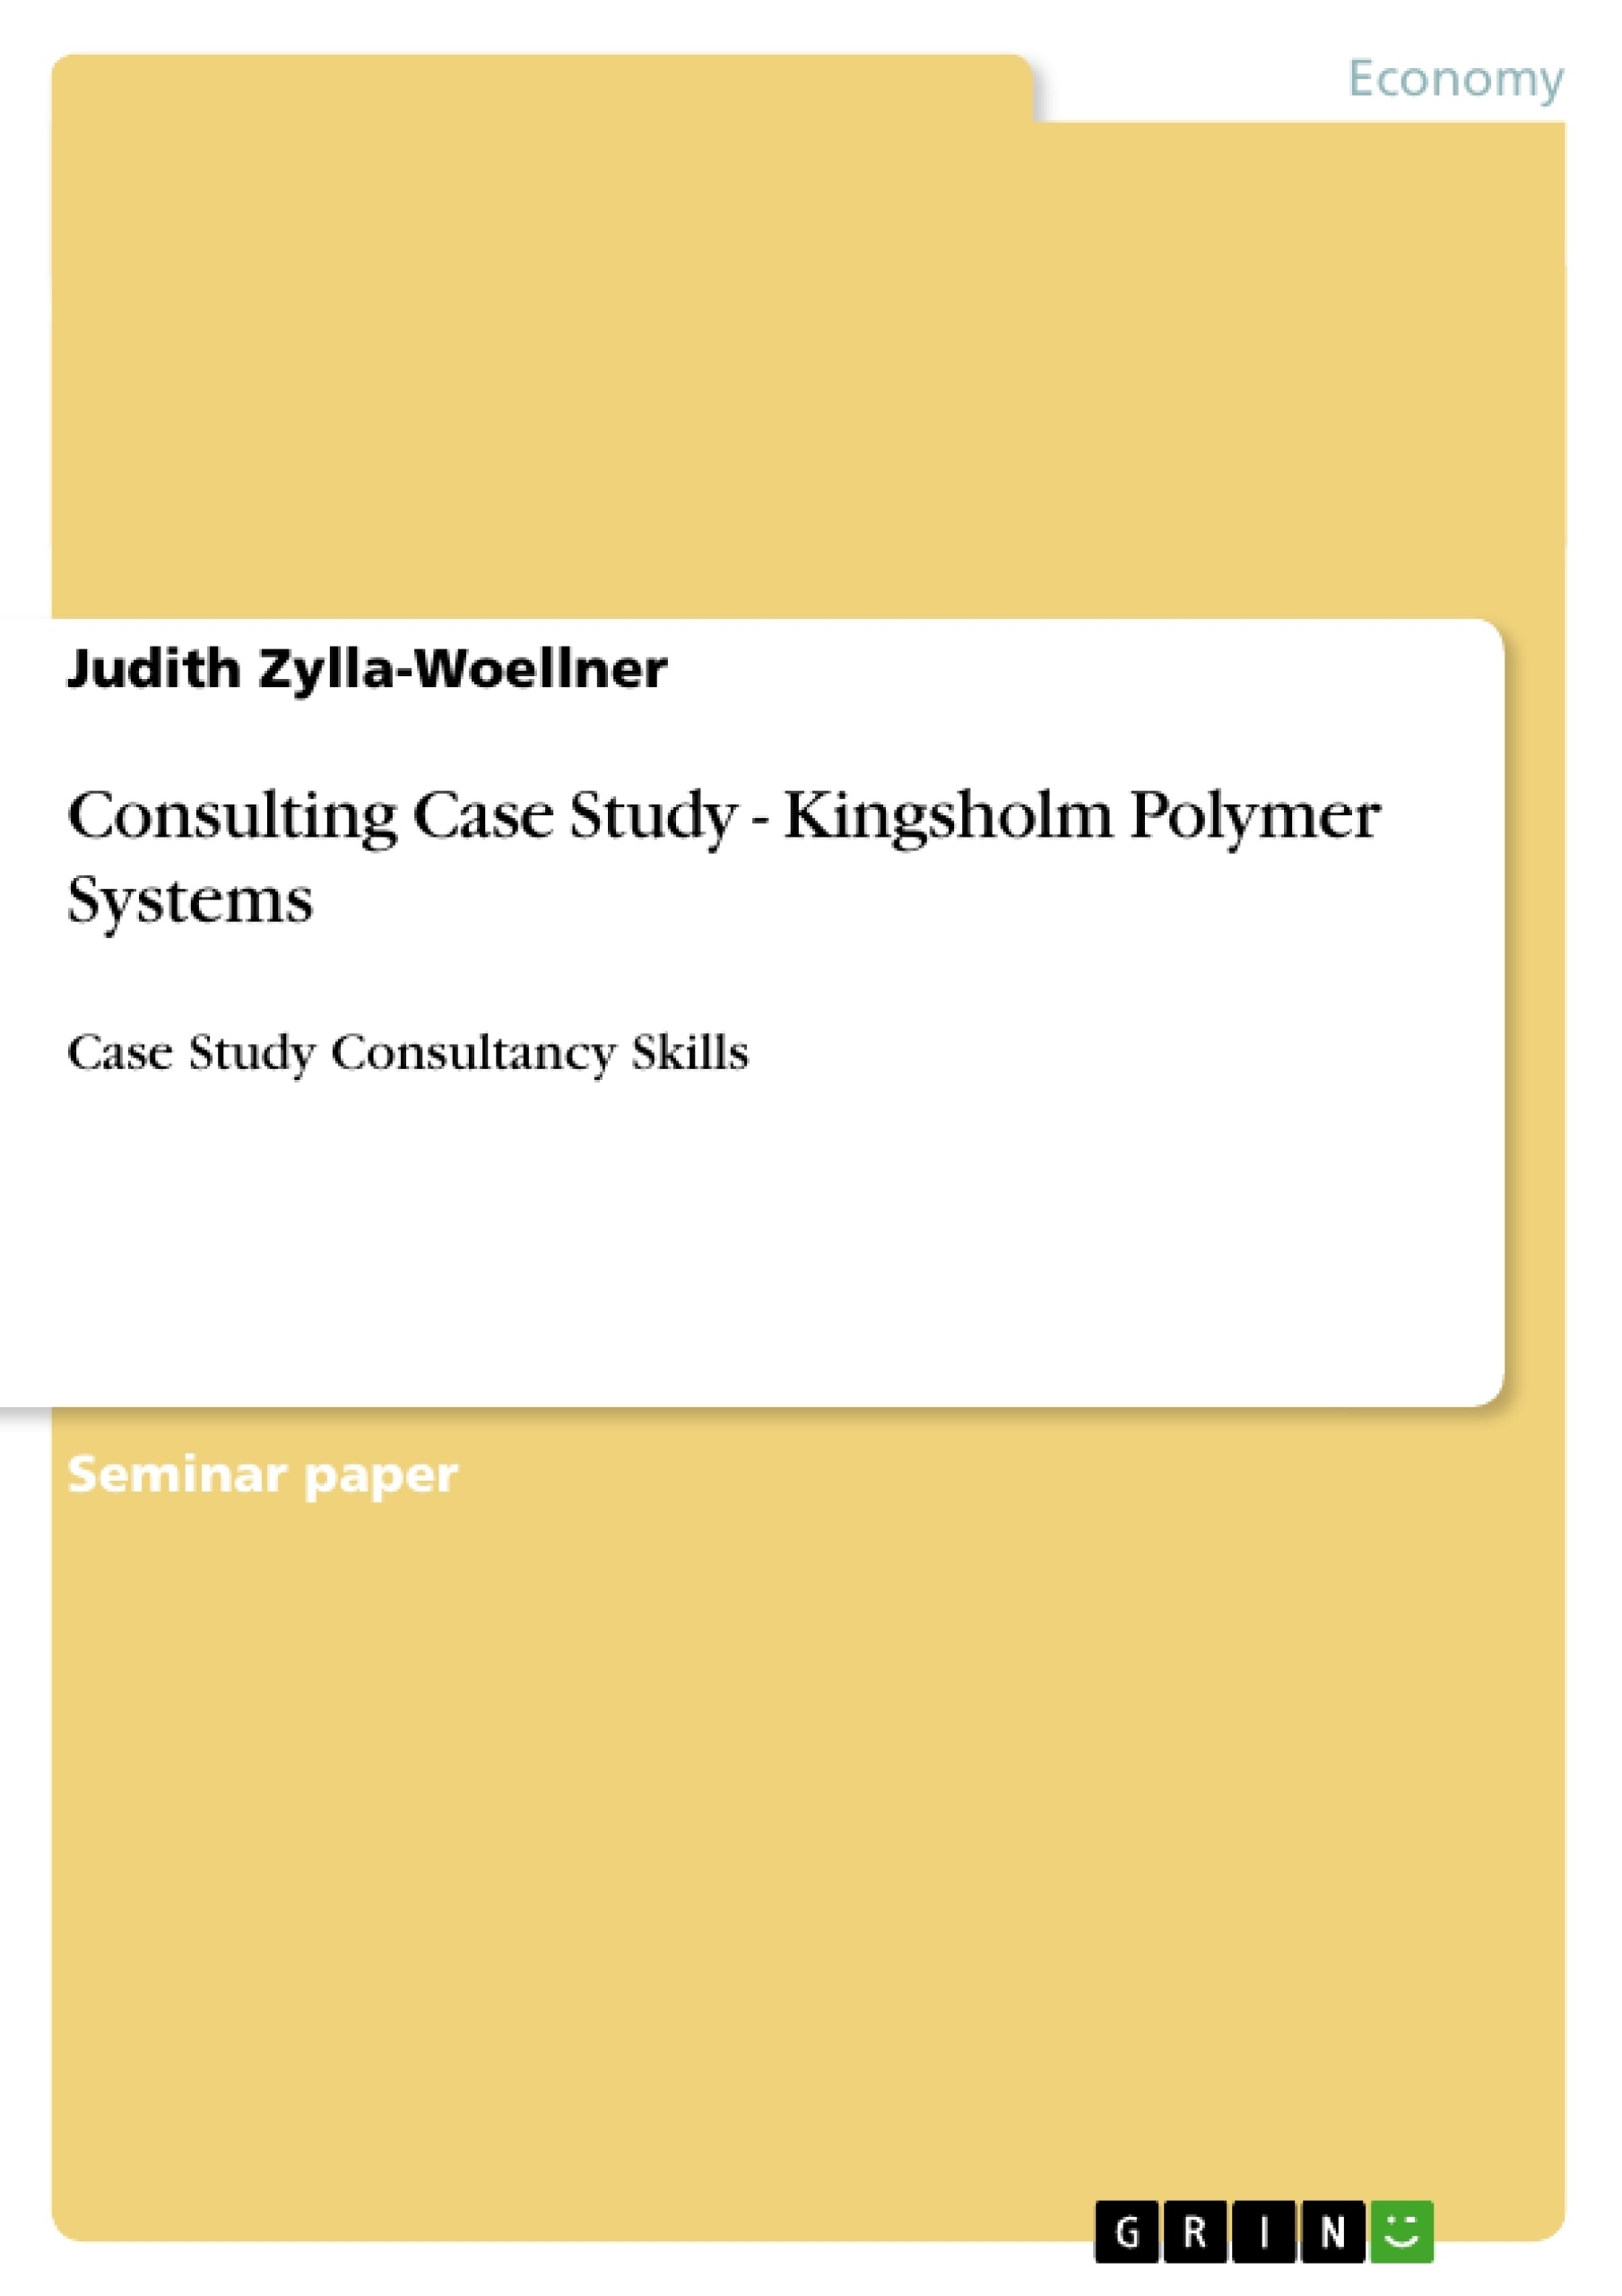 Title: Consulting Case Study - Kingsholm Polymer Systems